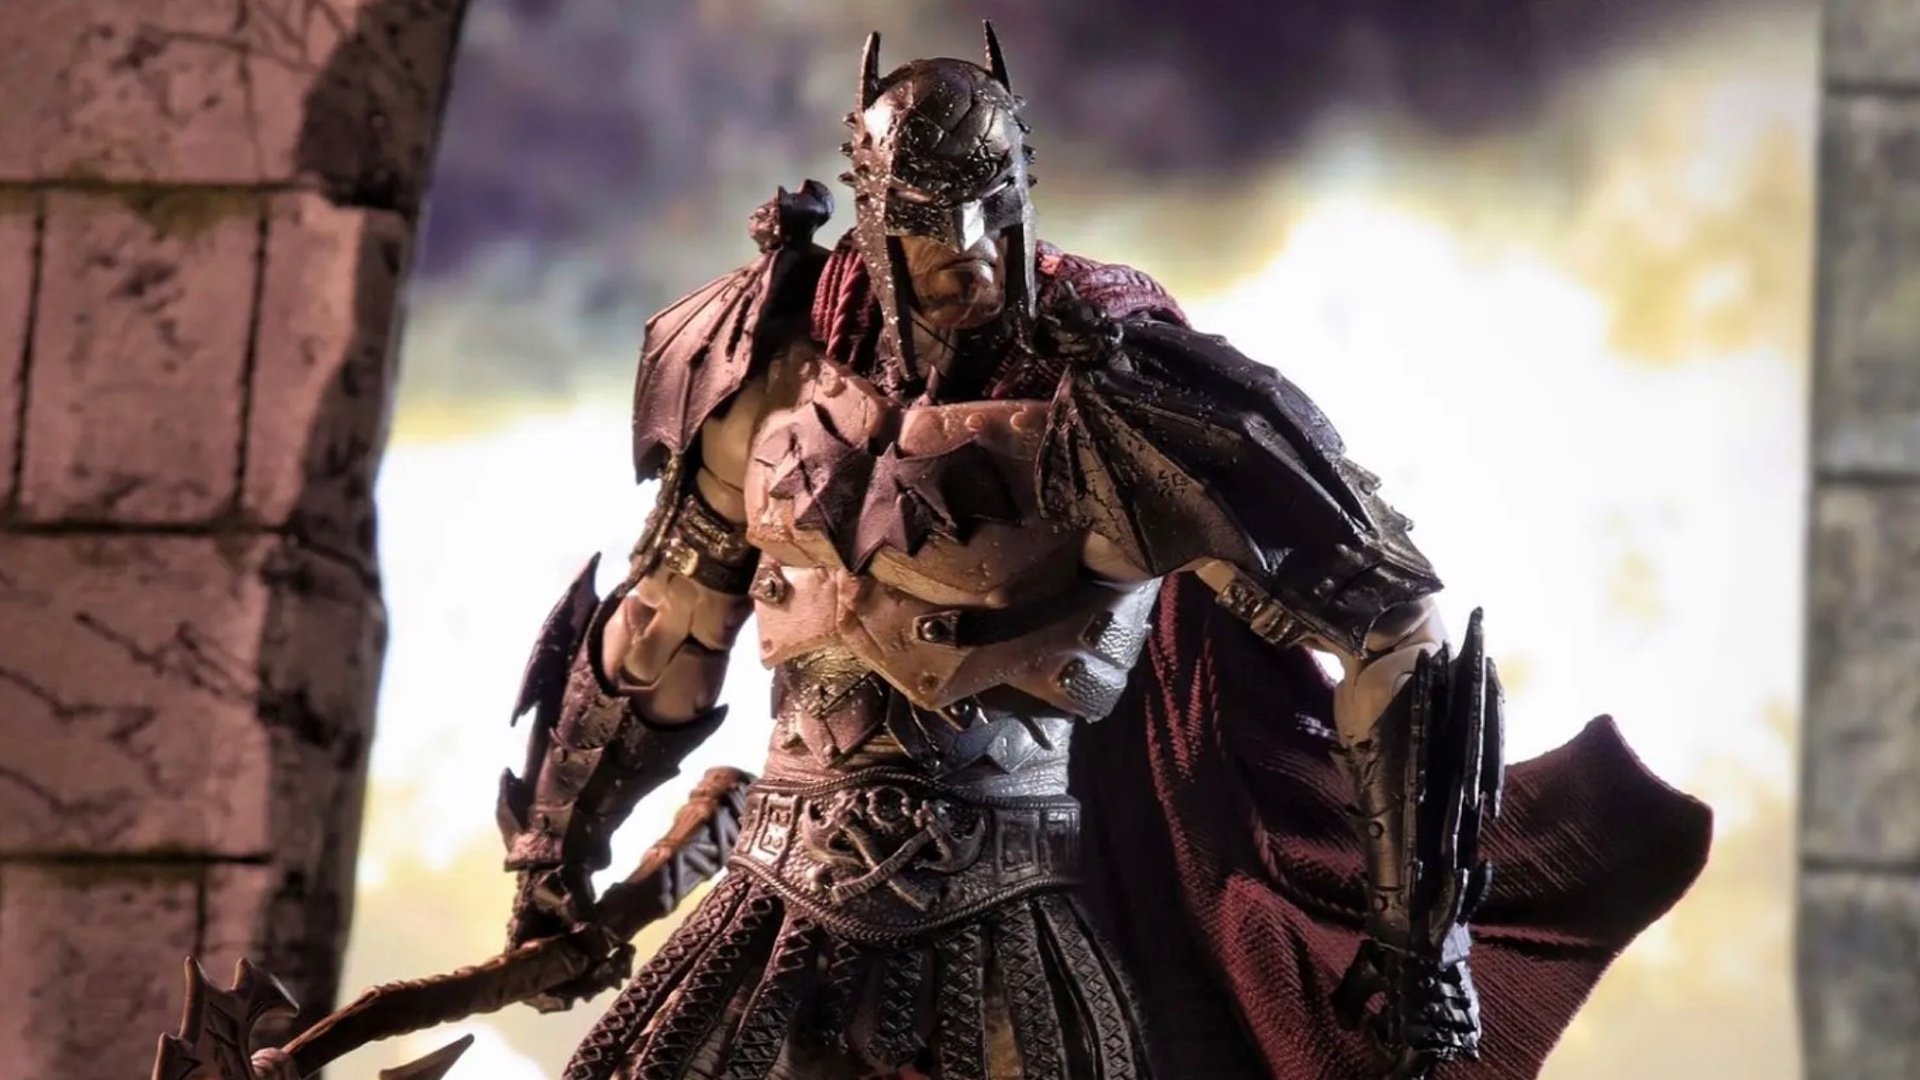 mcfarlane toys shares new image of its dc multiverse dark nights metal gladiator action figure Rise Of McFarlane Toys & DC Action Figures!